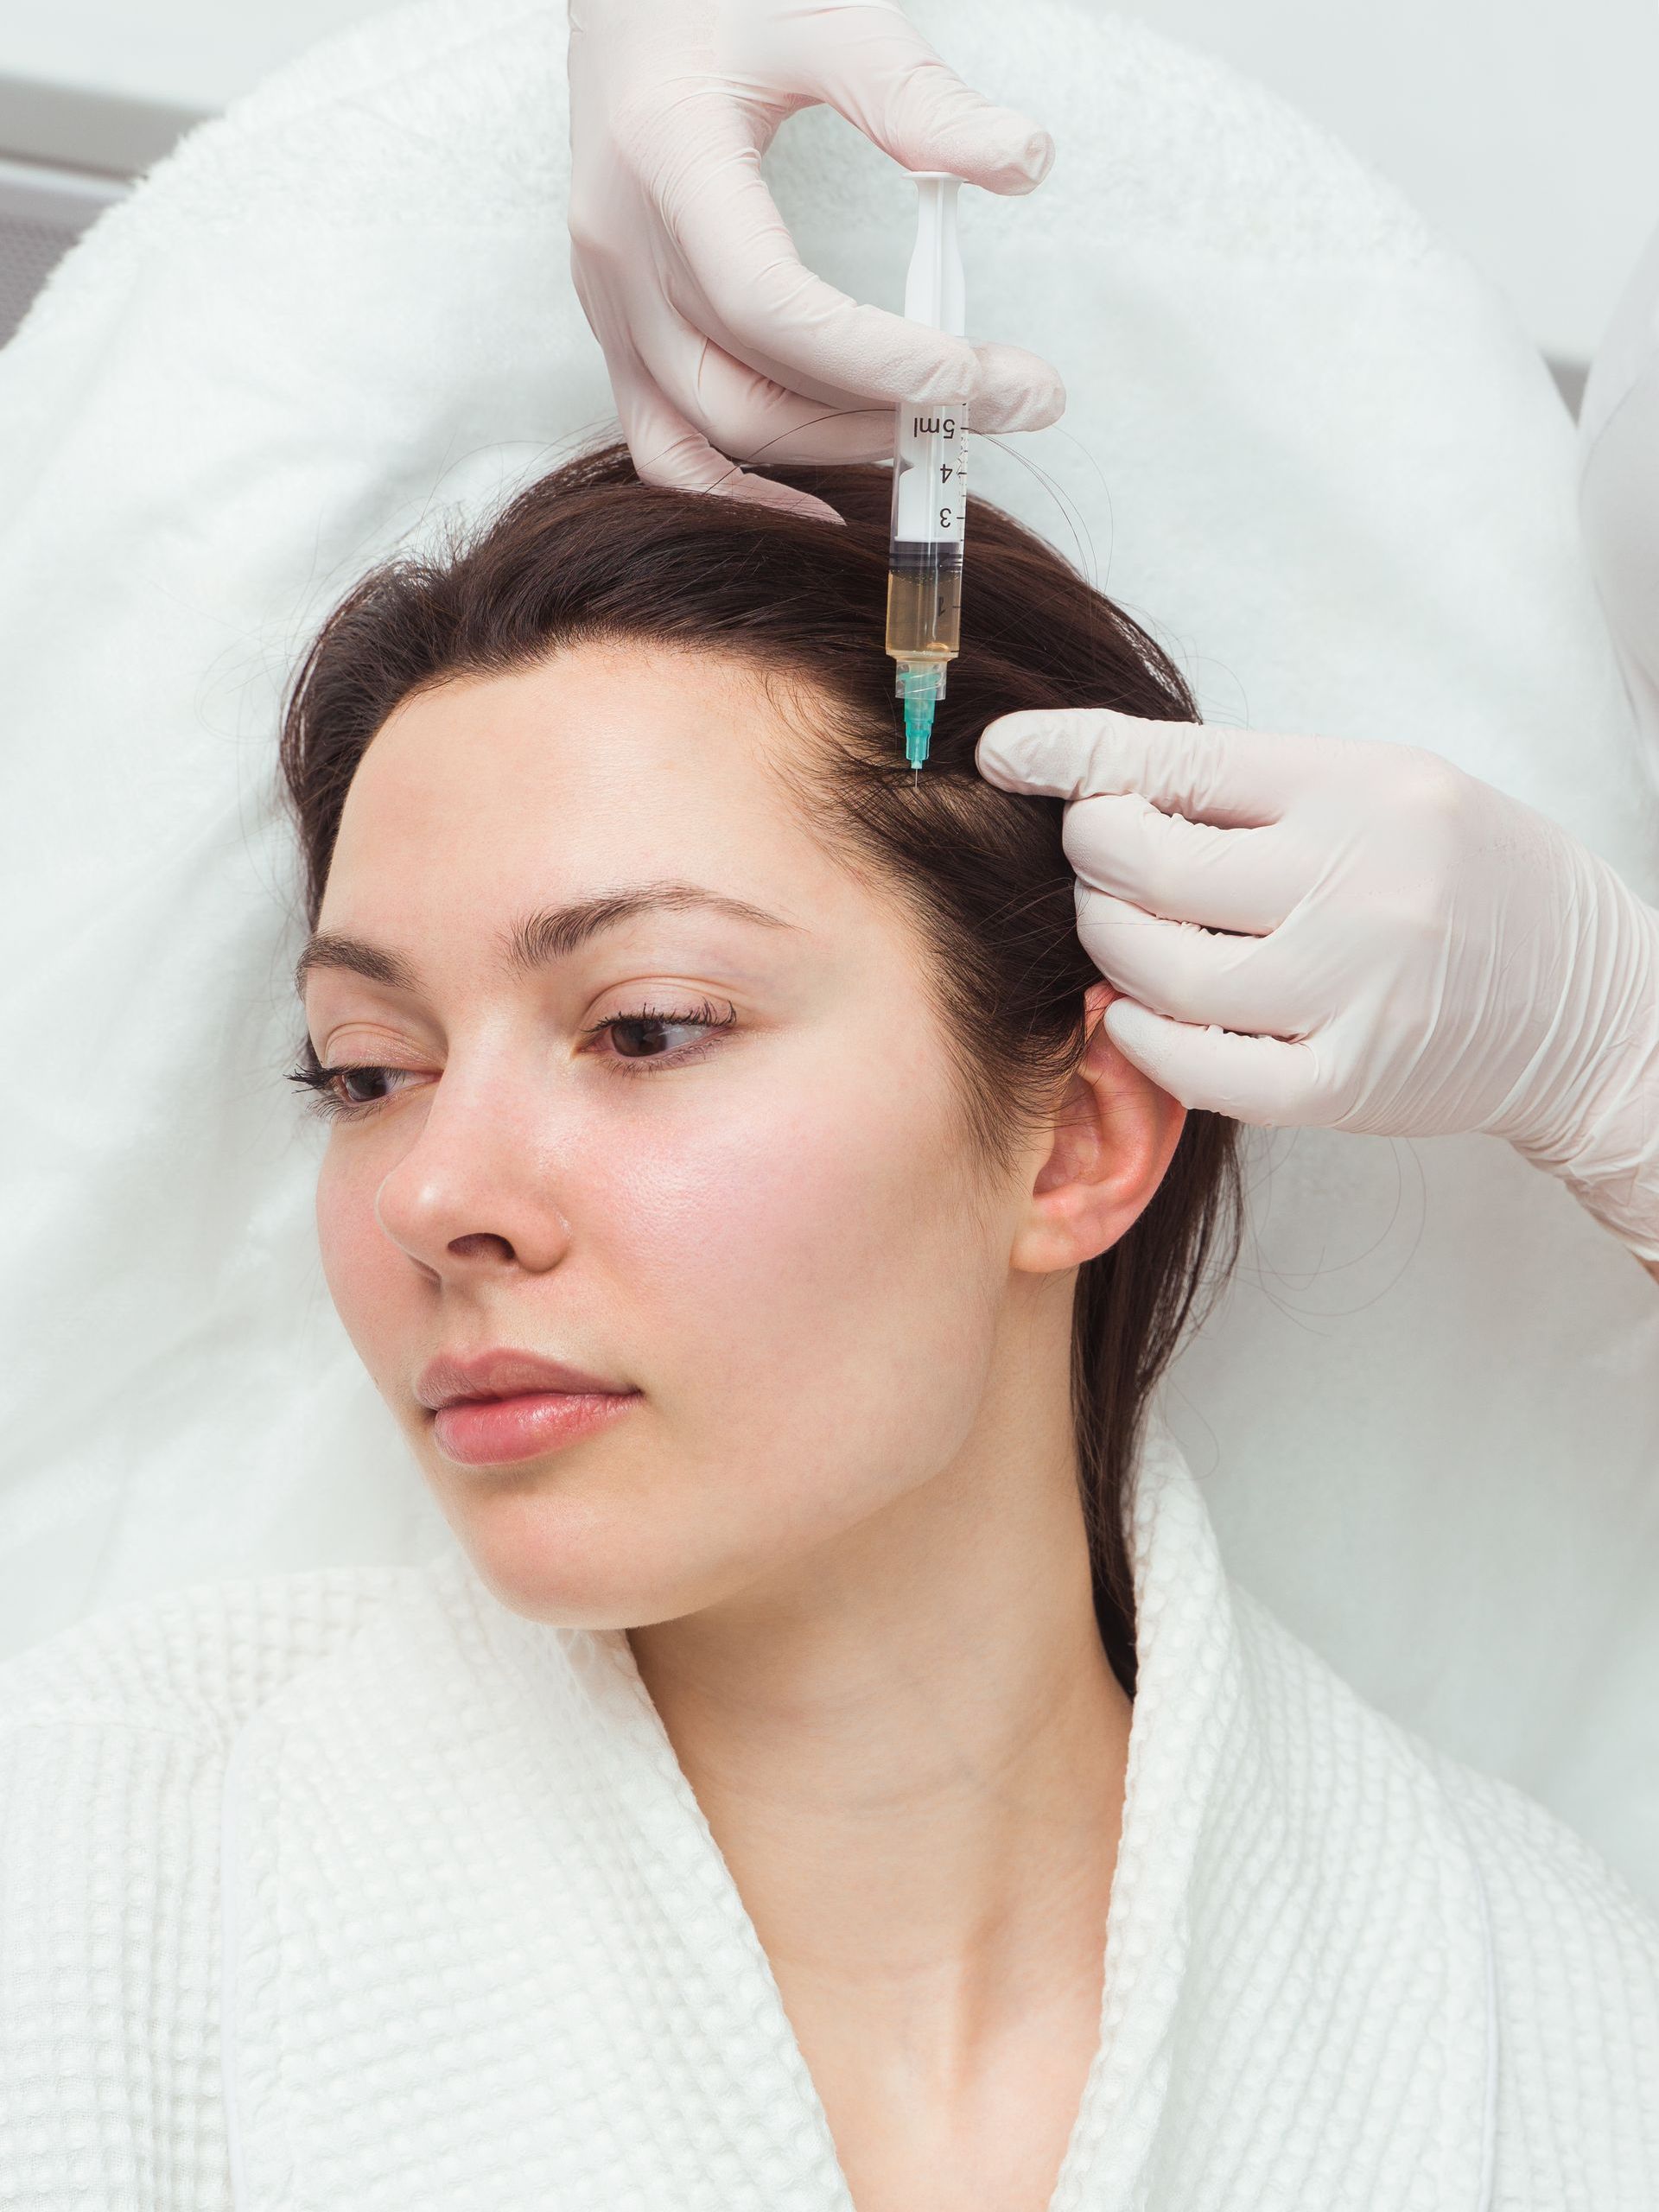 a woman is getting a PRP injection in her head